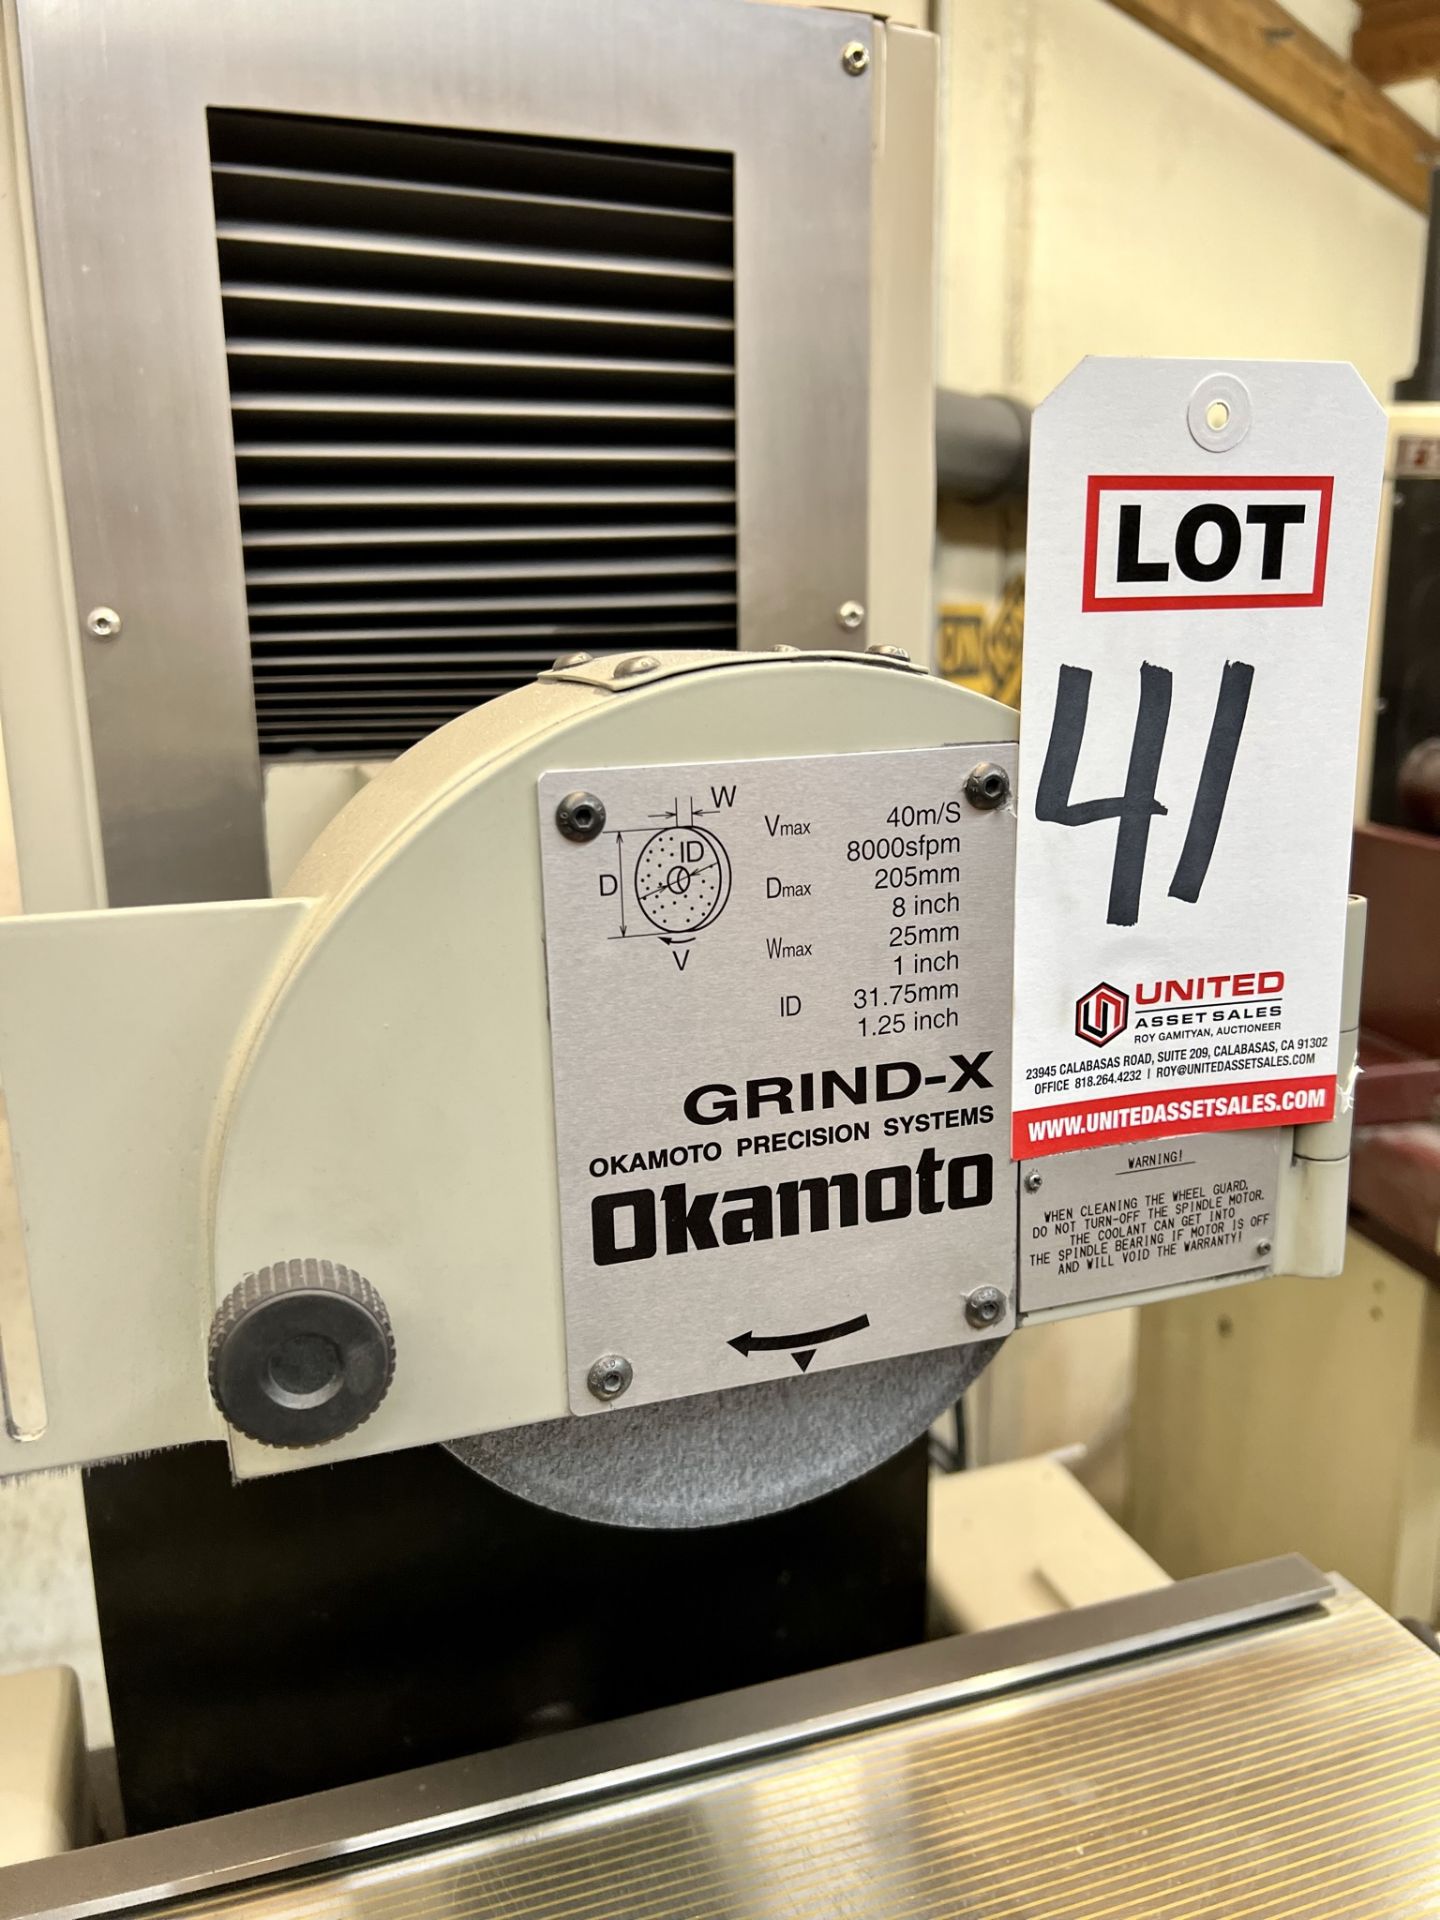 2018 OKAMOTO LINEAR 618B SURFACE GRINDER, S/N 48824, W/ WALKER 18" X 6" MAGNETIC CHUCK AND CONTROLS, - Image 9 of 15